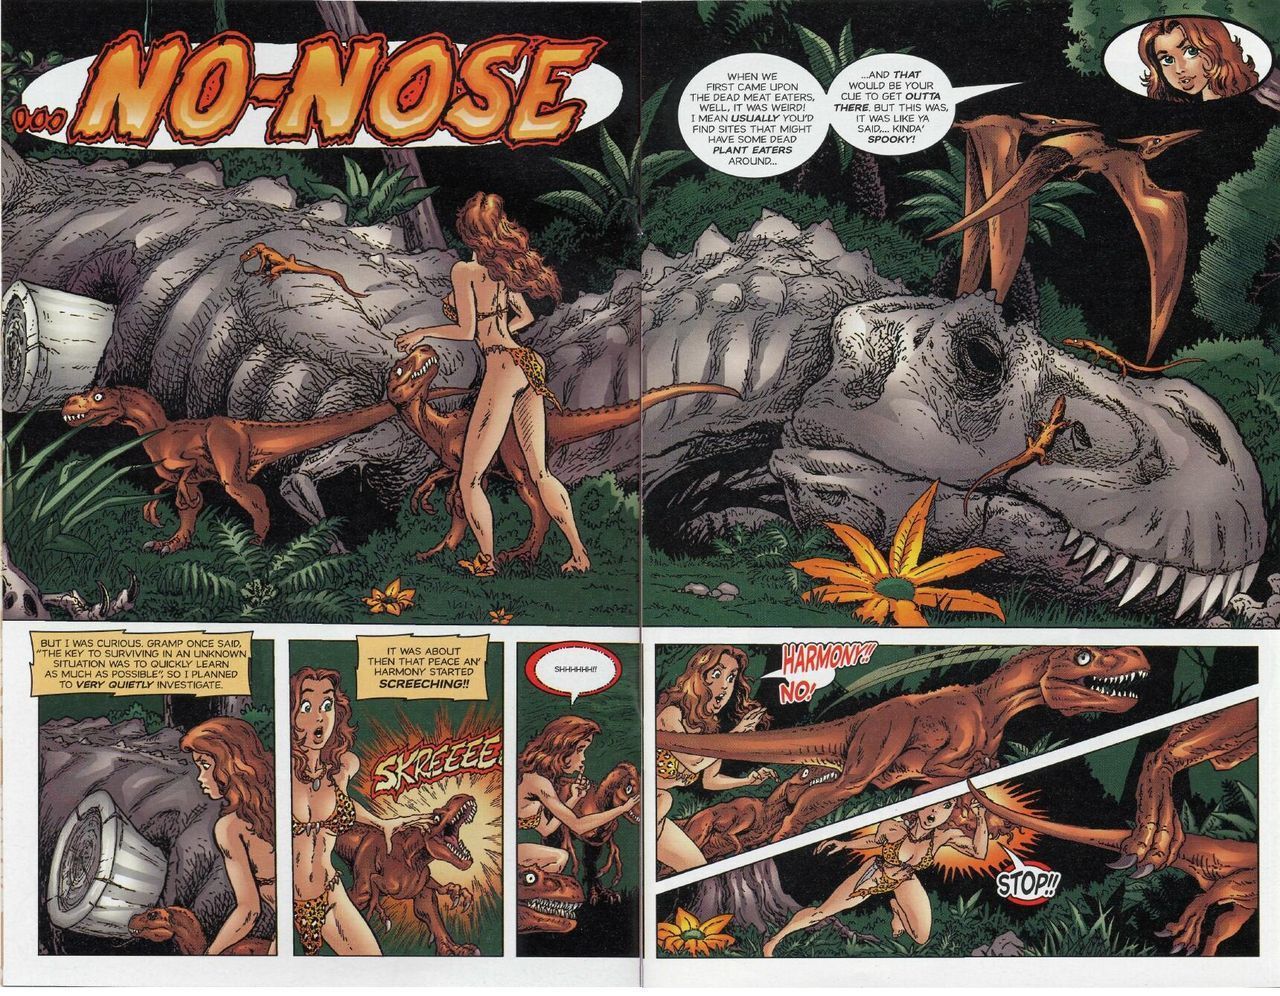 Budd Root- Sean Shaw Cavewoman - Color Special #1